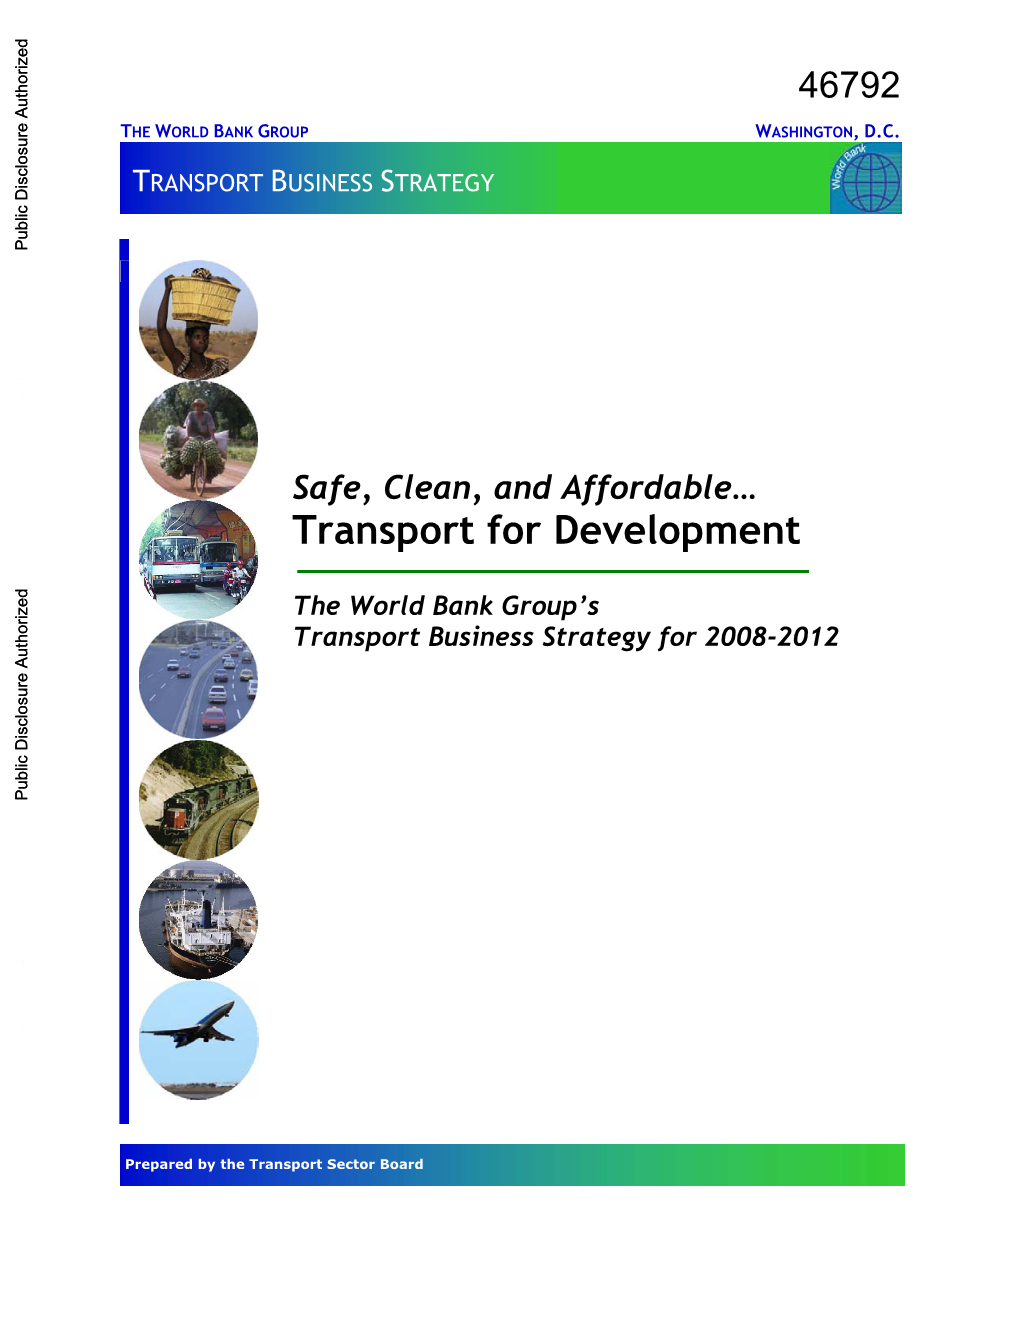 Transport Business Strategy for 2008-2012